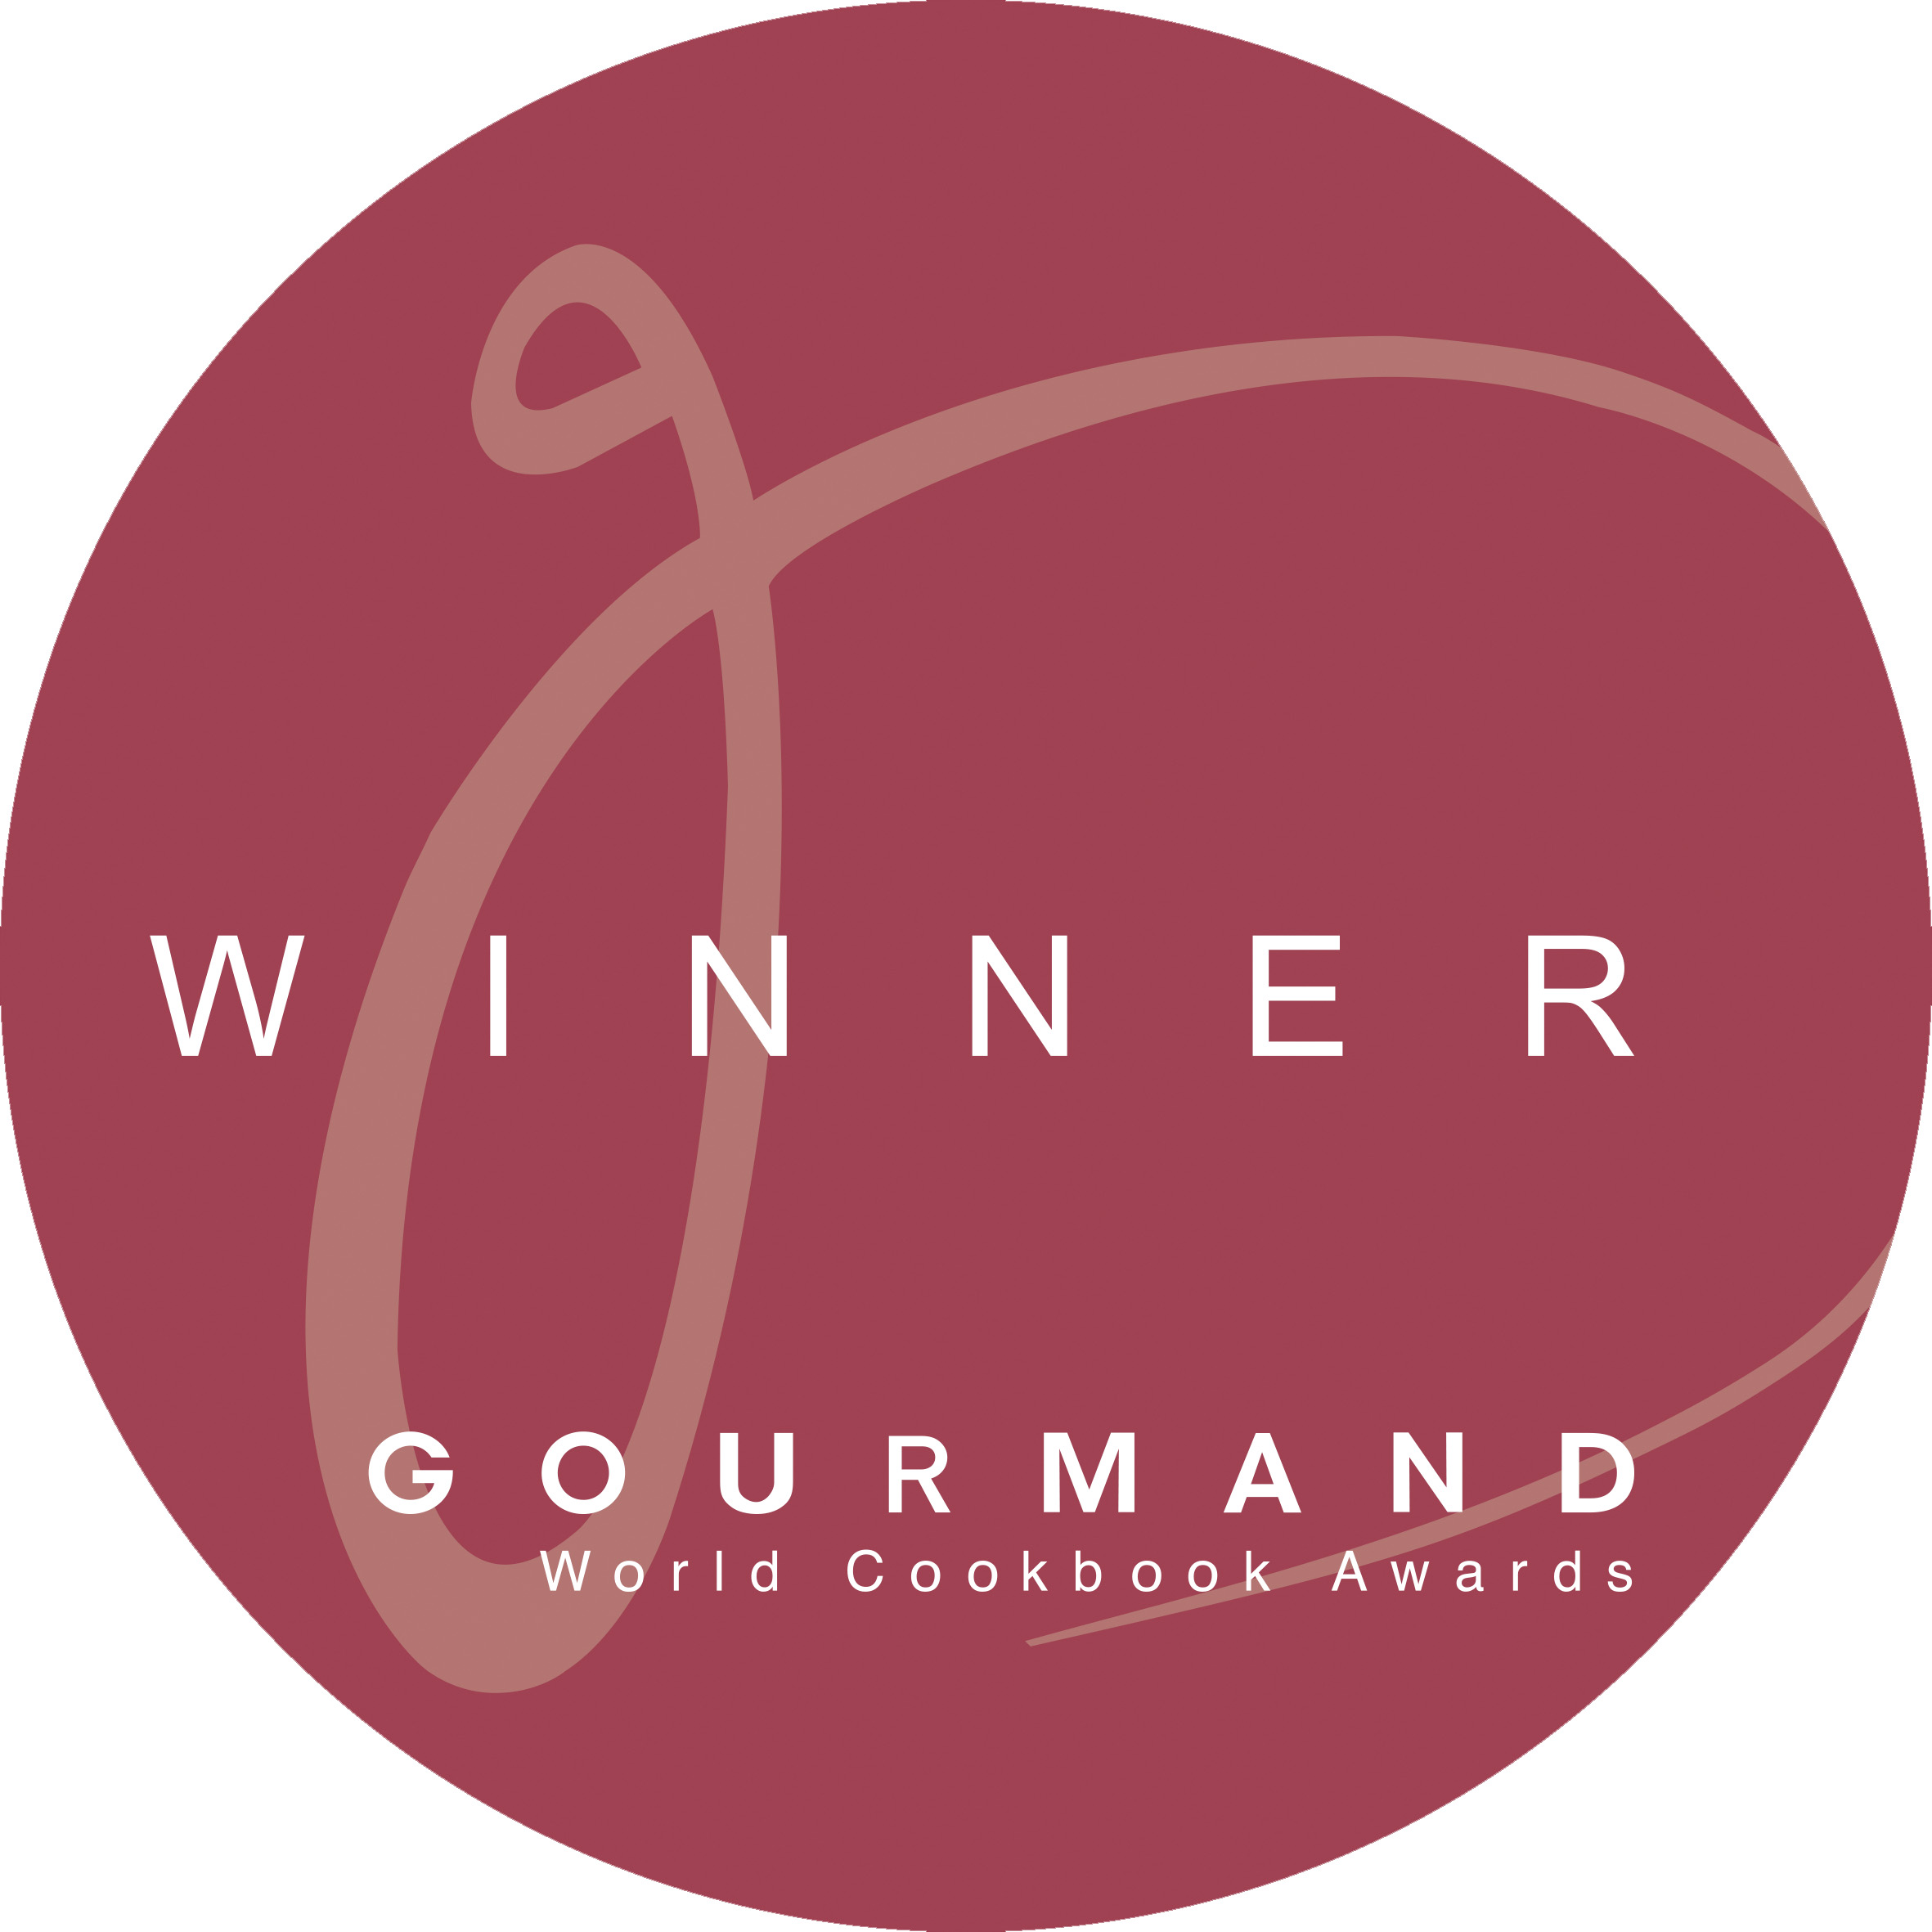 2016 Best Publisher Gourmand World Cookbook Awards + 2016 Best Scottish Local Cuisine Book - "Shetland Food and Cooking"